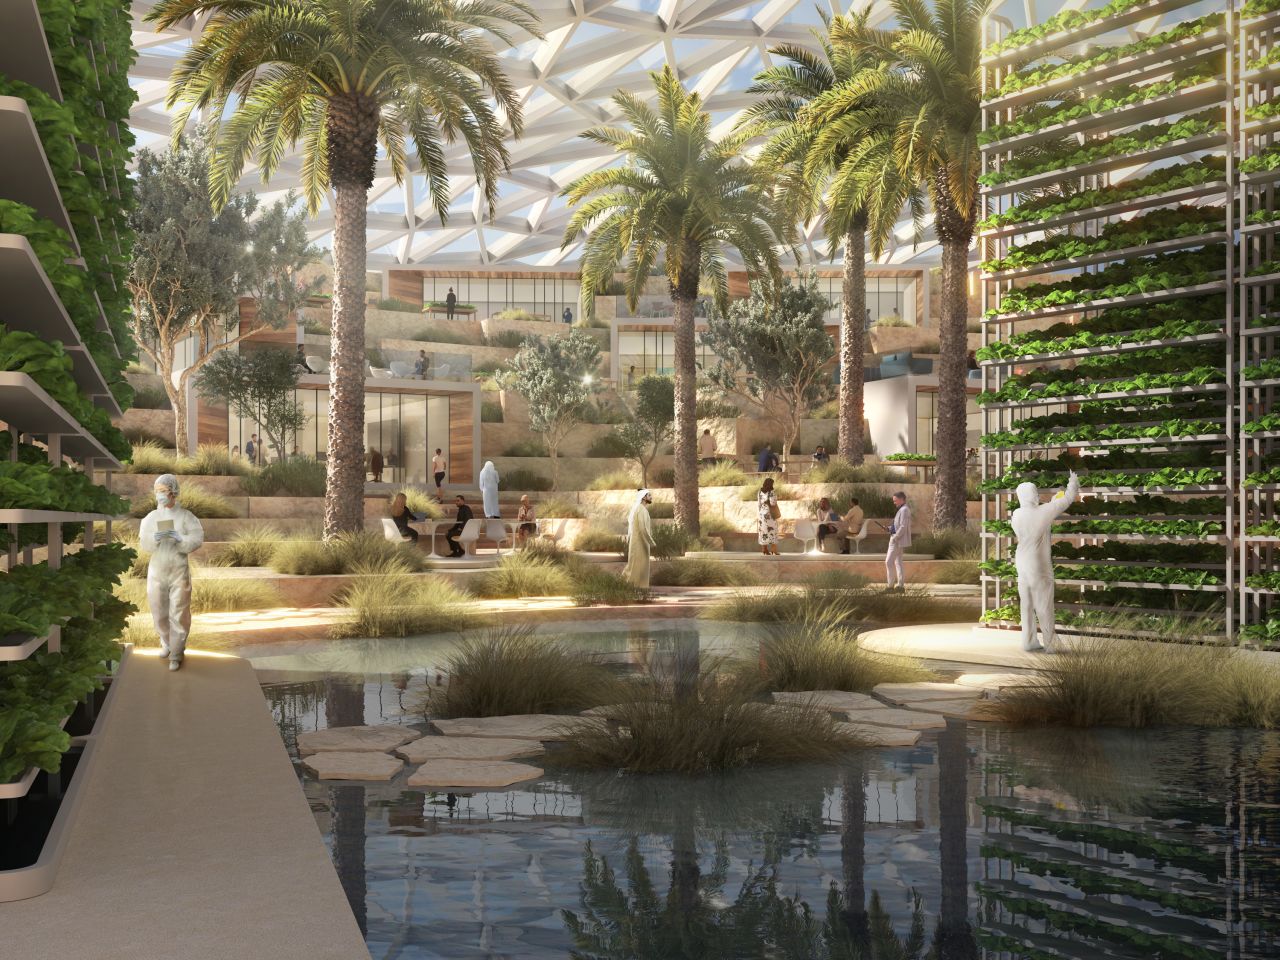 URB's CEO Baharash Bagherian wants the Agri Hub to help visitors understand sustainable agriculture techniques such as vertical farming -- growing plants without soil or natural light in vertically stacked beds. This technique uses much less water than conventional methods.